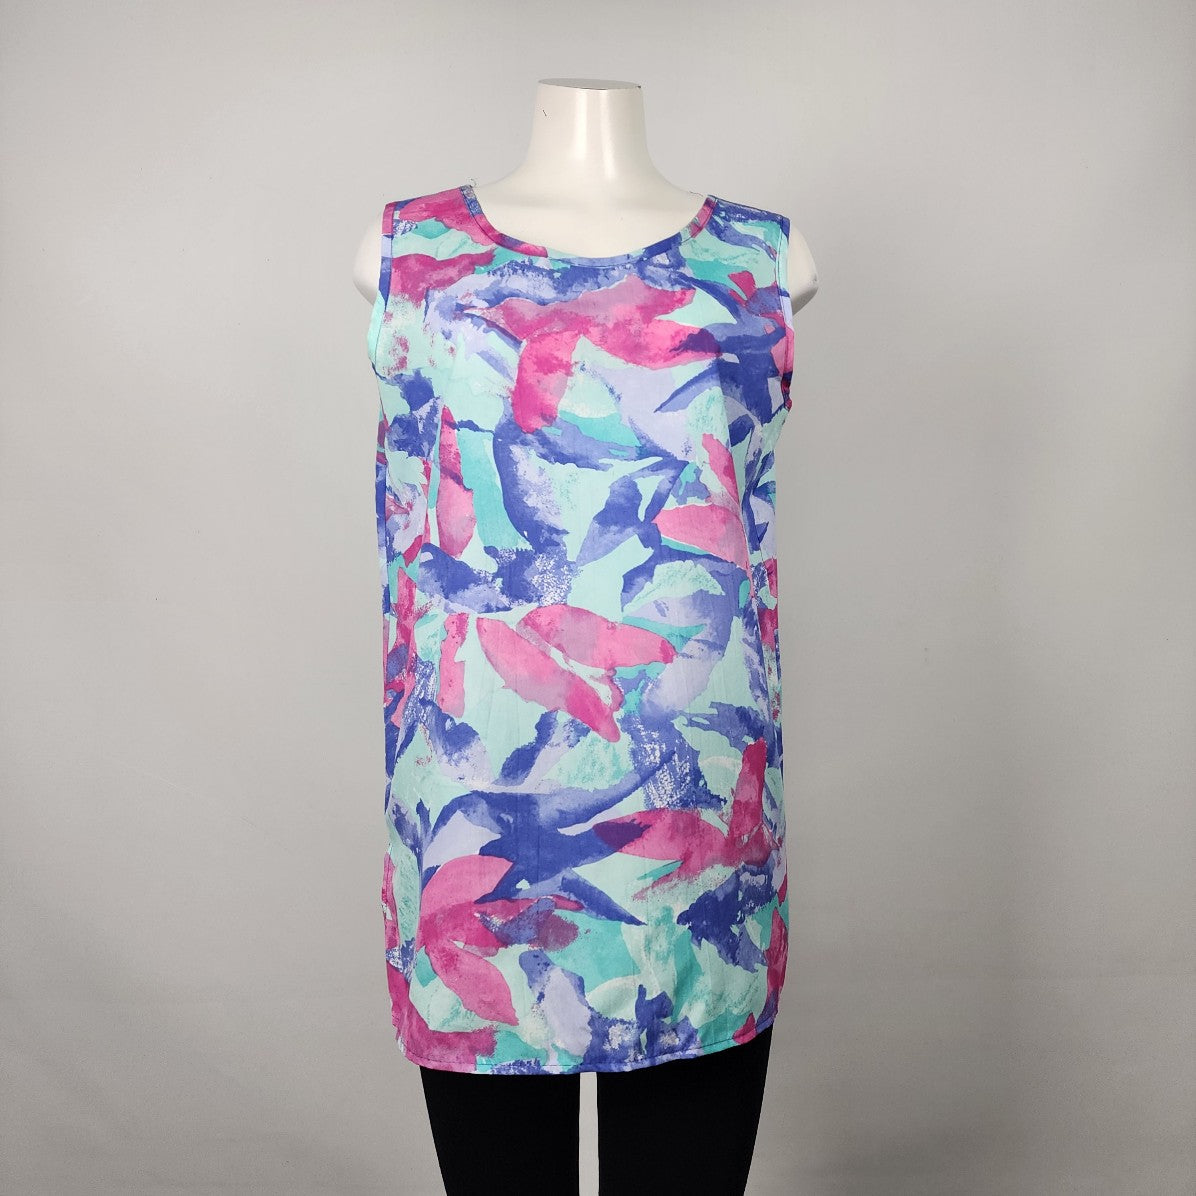 Vintage Mr. Max Pink Floral Sleeveless Top Size M